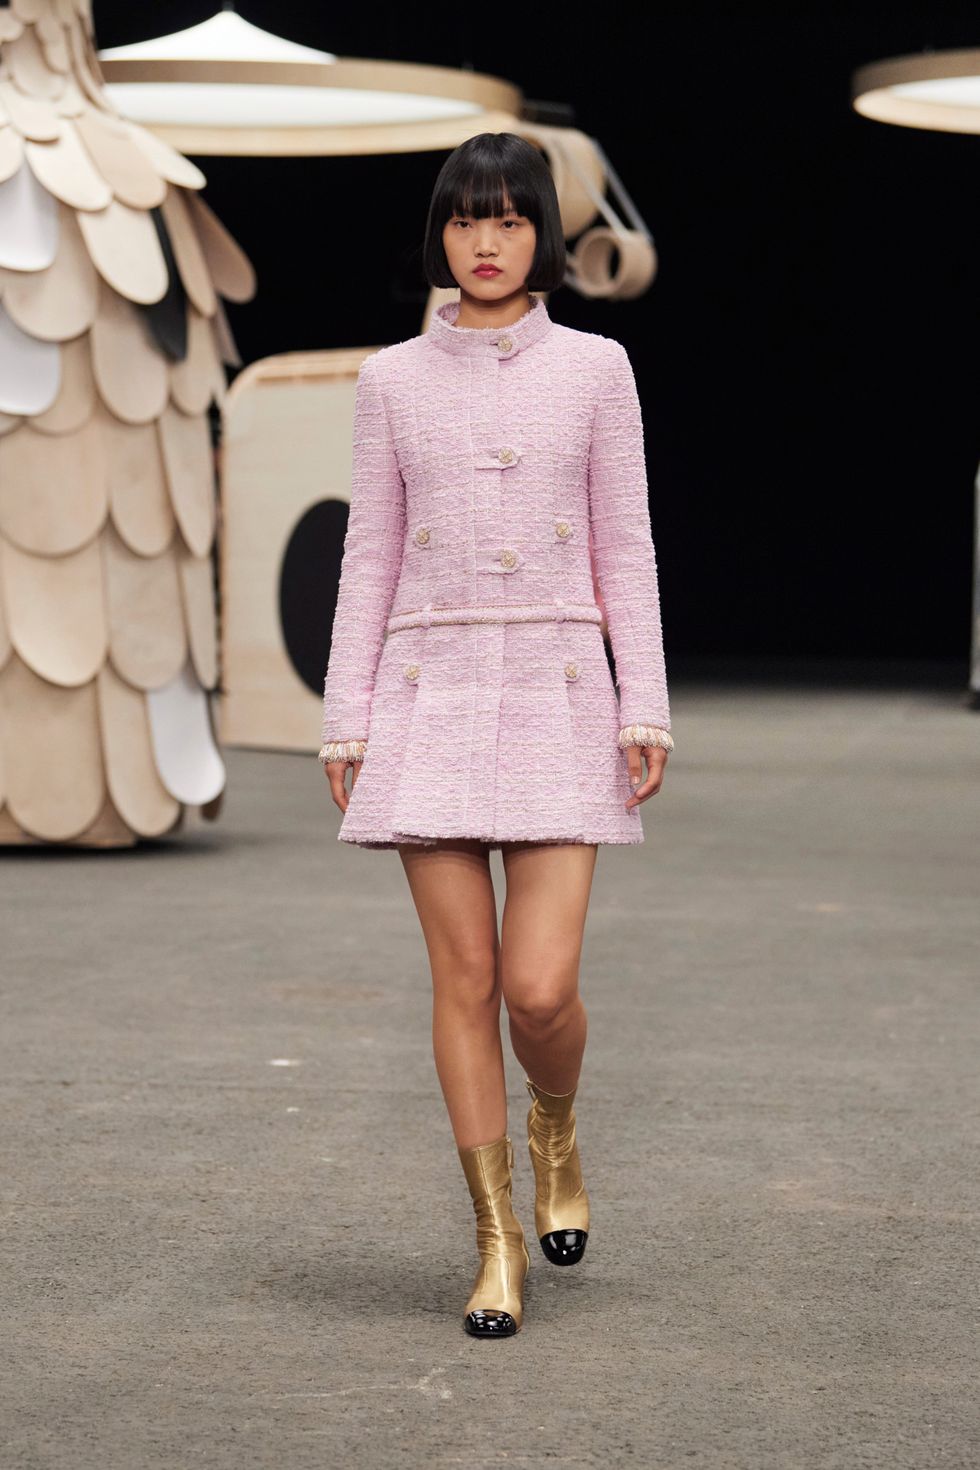 Chanel's elegant show is the quiet eye of a Twitter storm at Paris